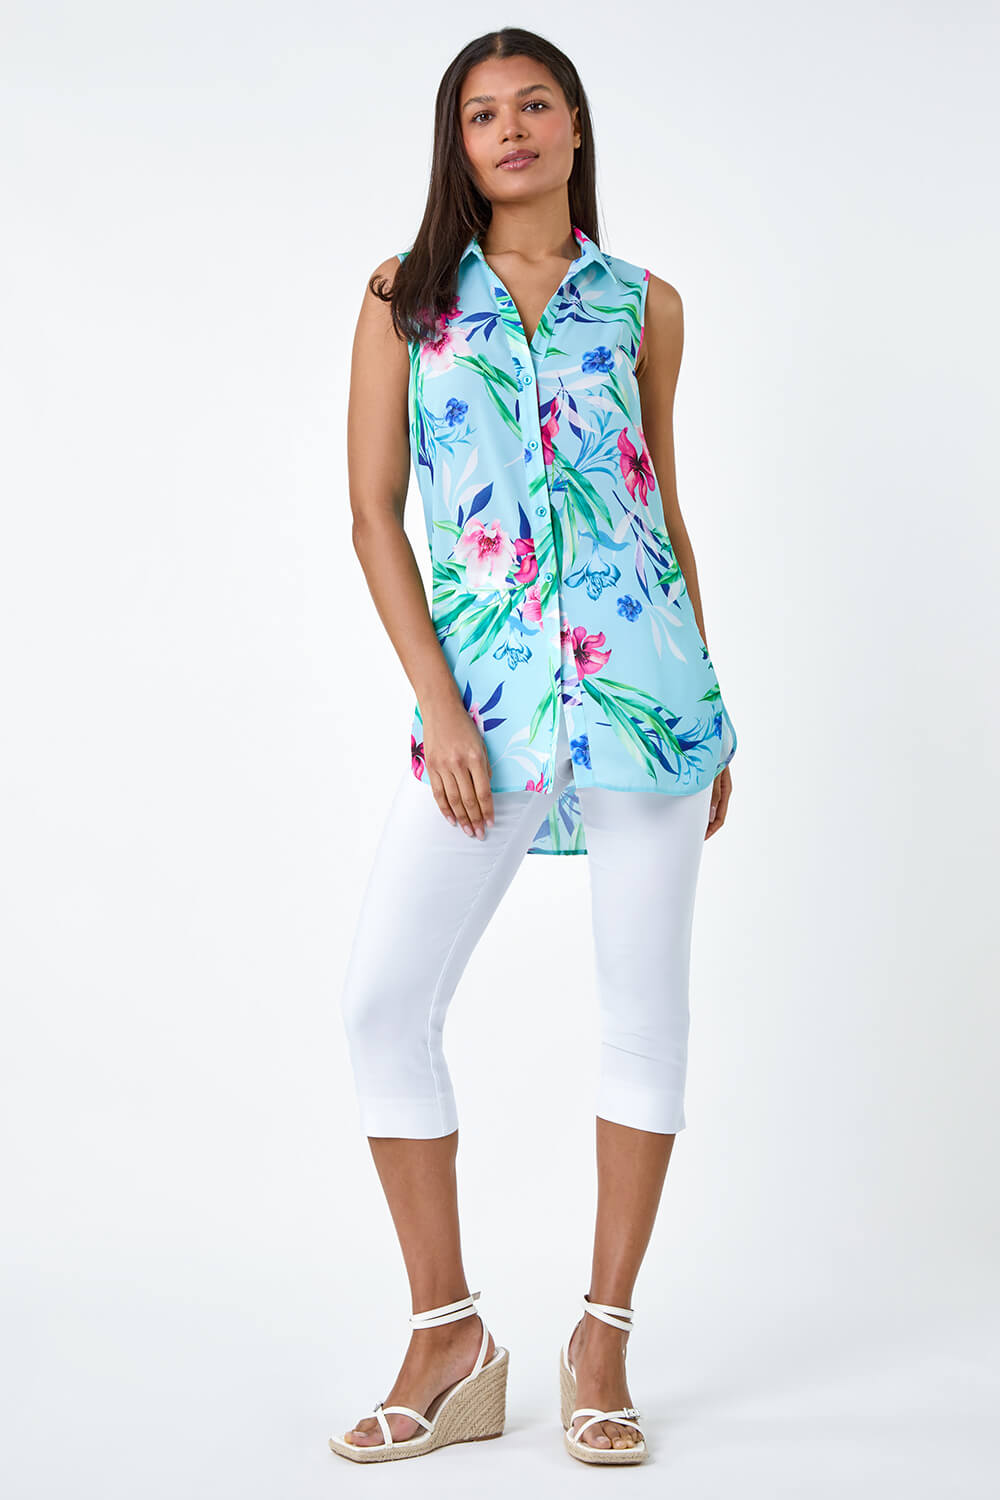 Blue Tropical Floral Sleeveless Button Blouse, Image 3 of 5